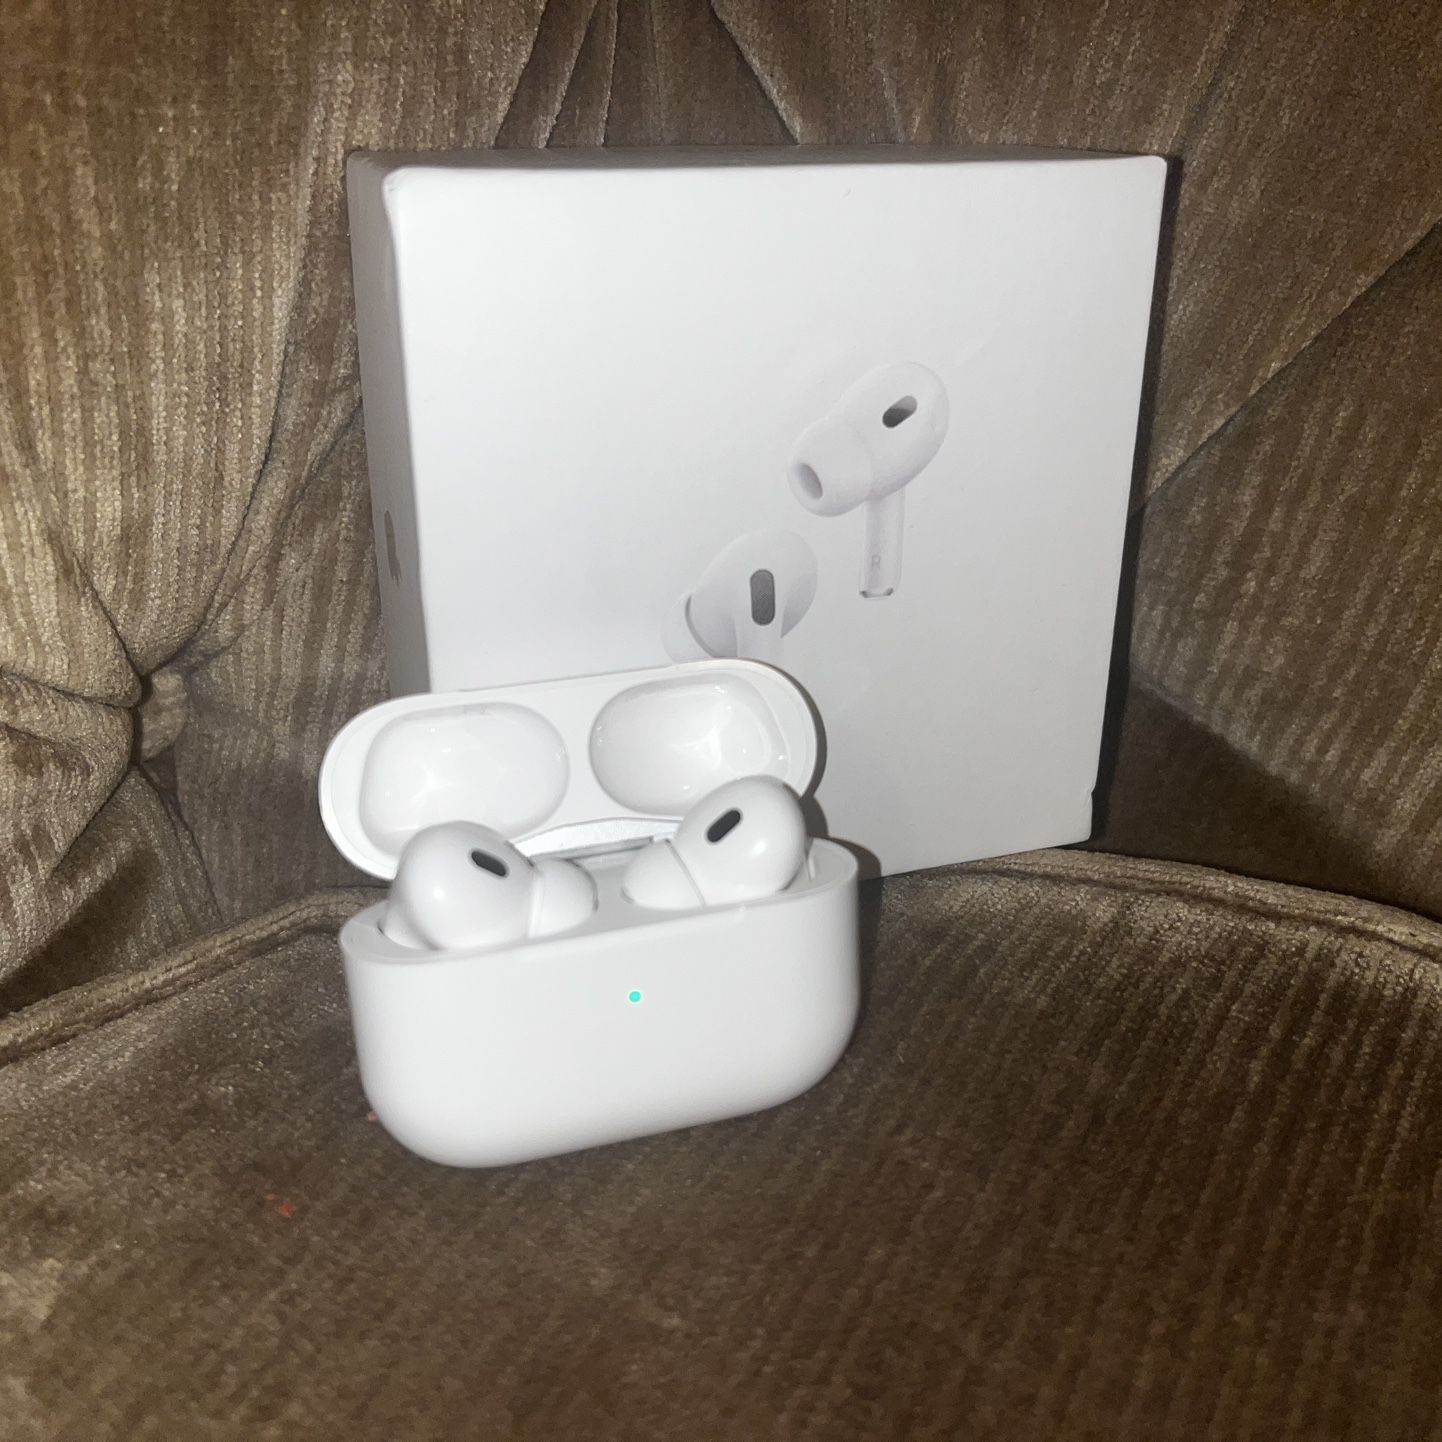 Used Airpods Pro (2nd Generation) - Good Condition, Great Price